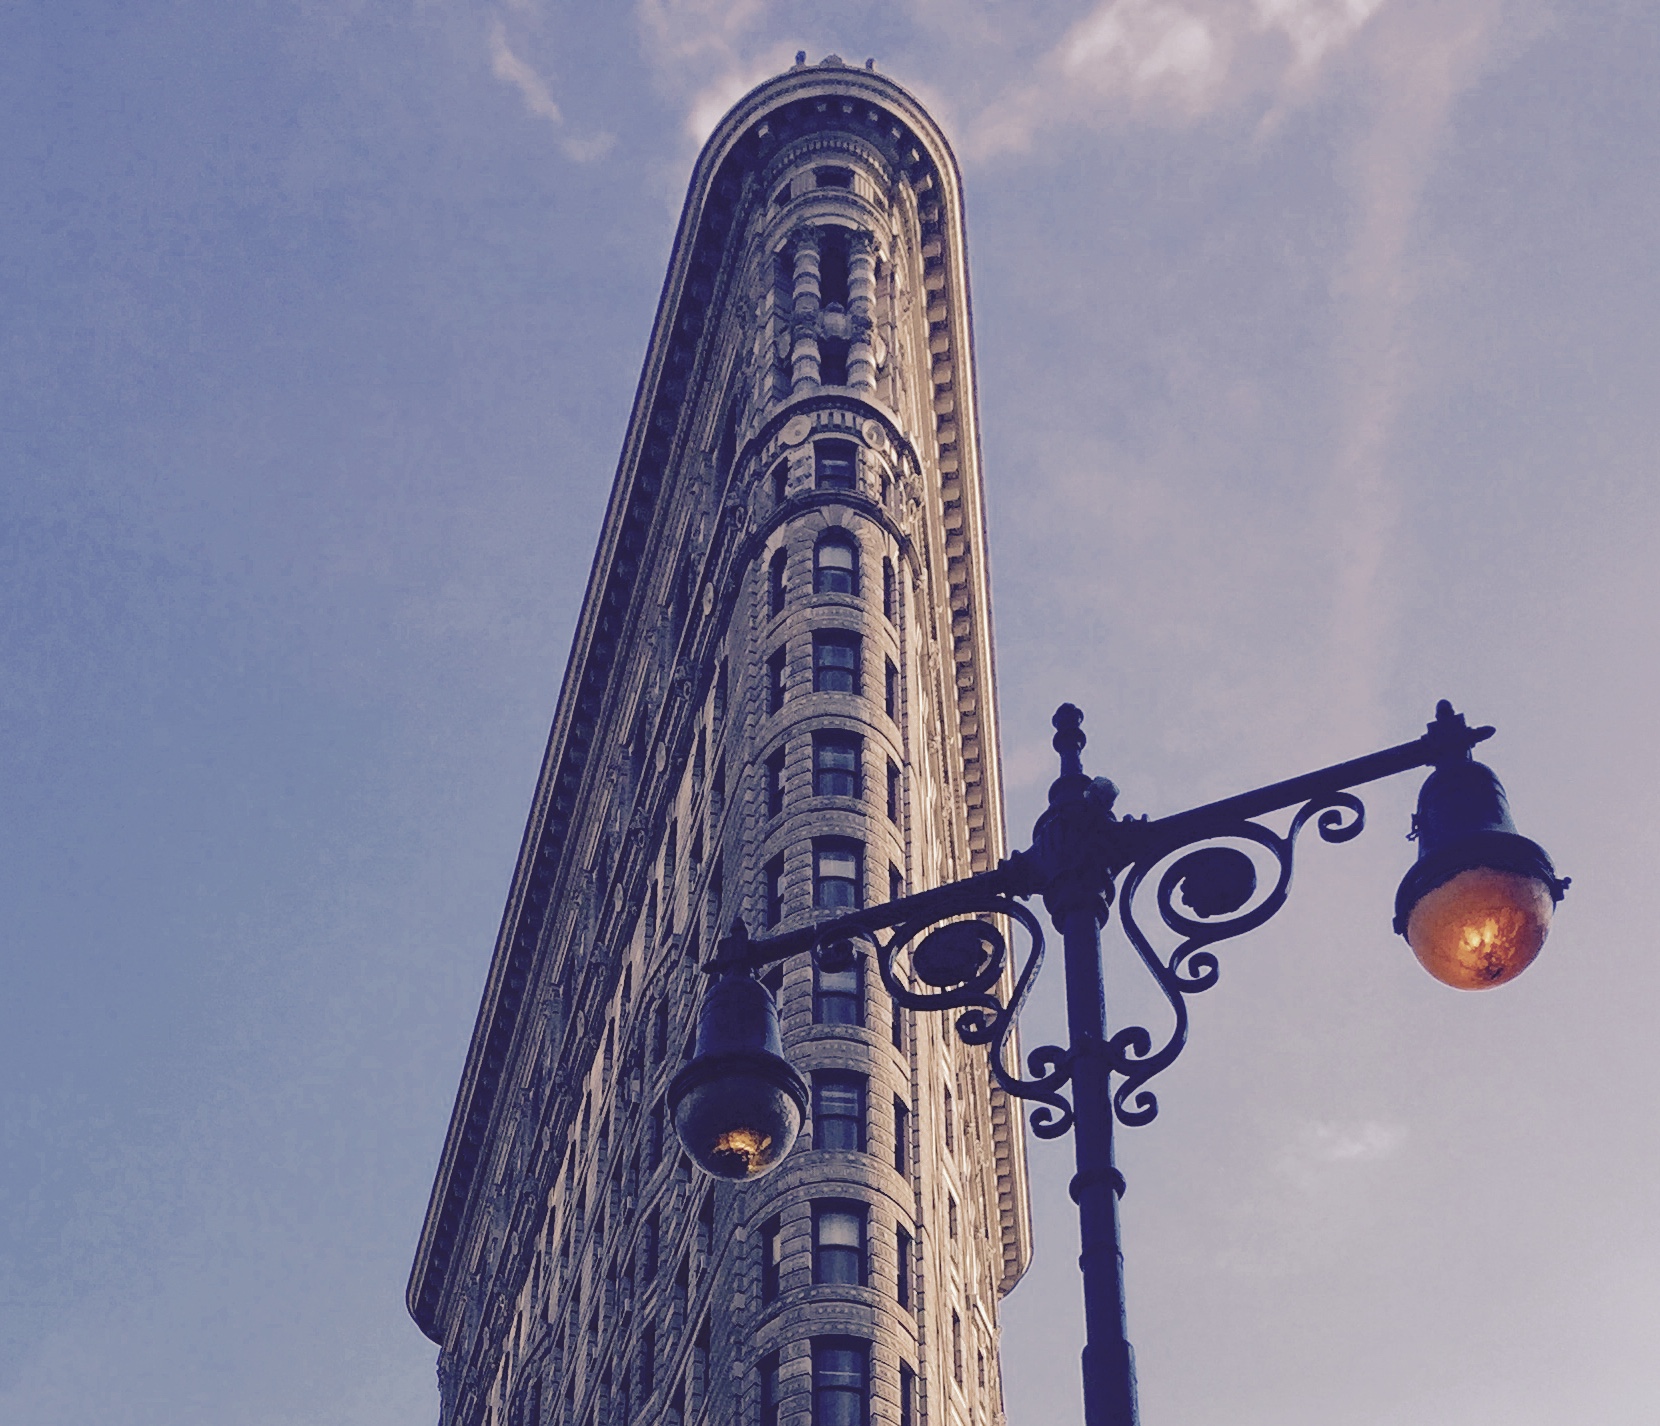 Add The Flatiron District to Your NYC 